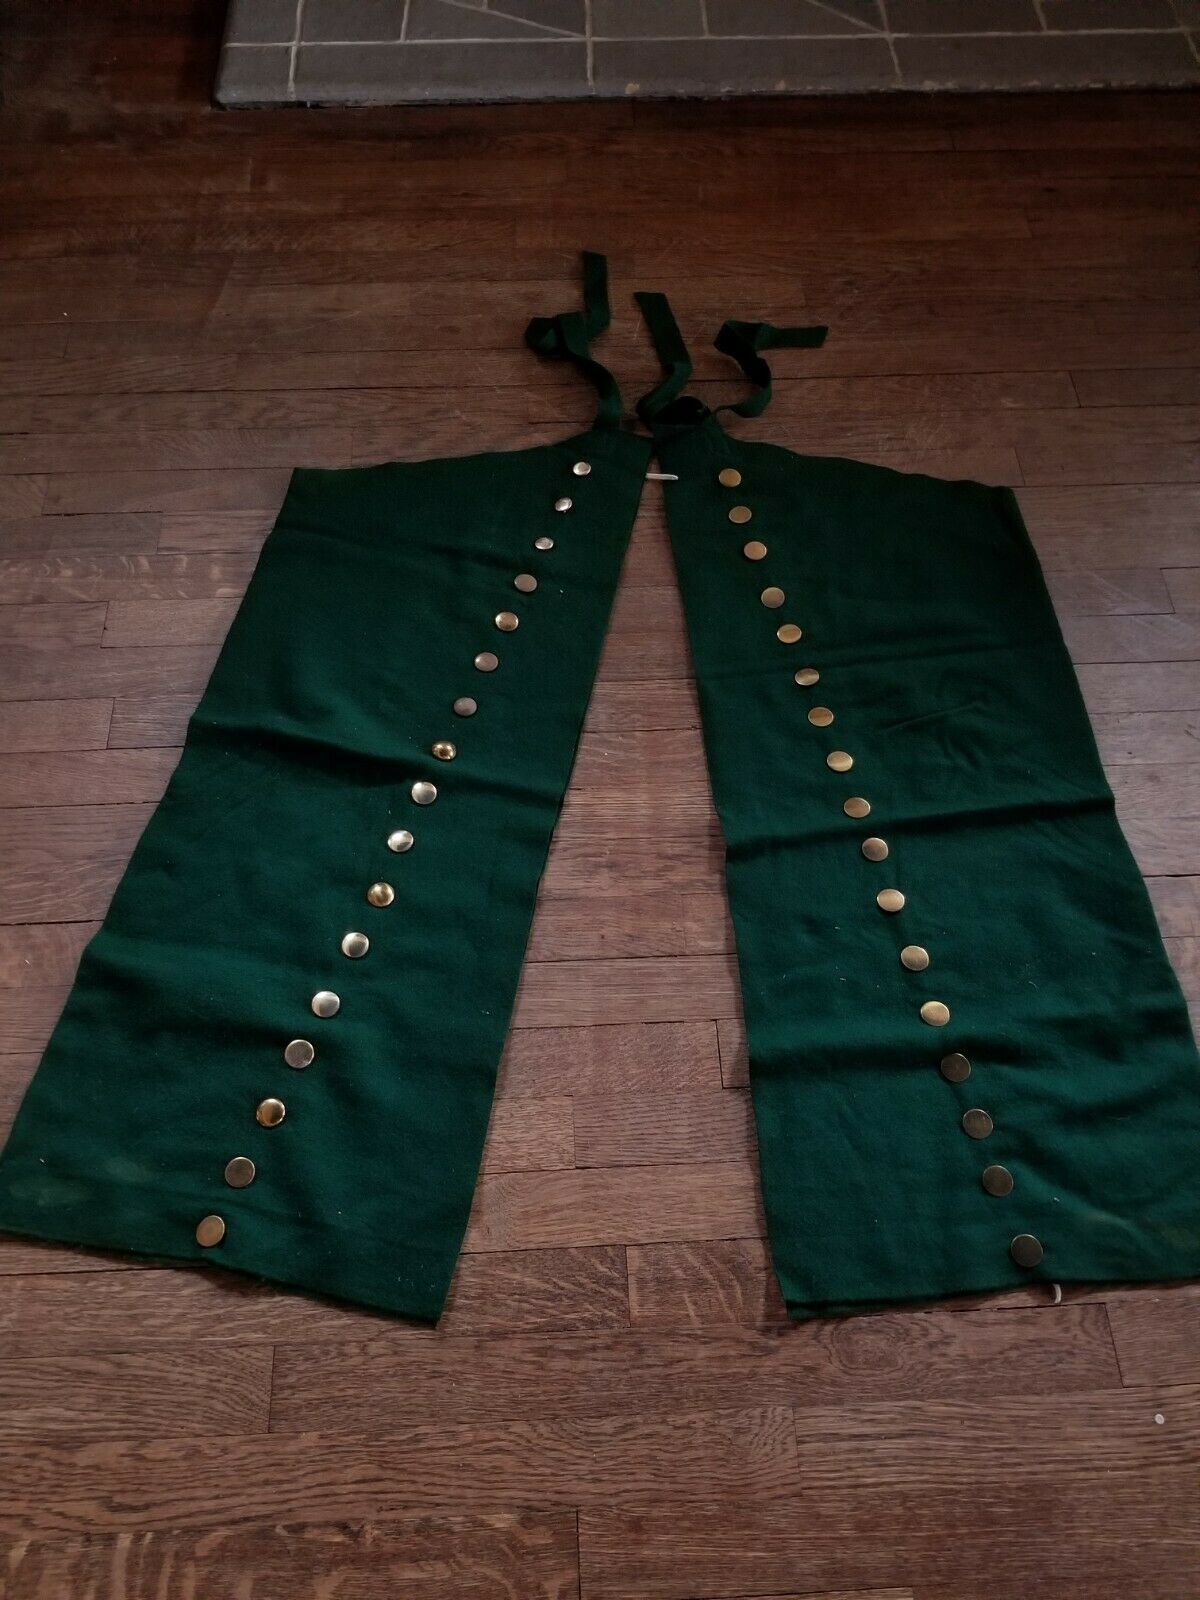 Antique Trade Cloth Used For Native American Dance Leggings, Forest Green